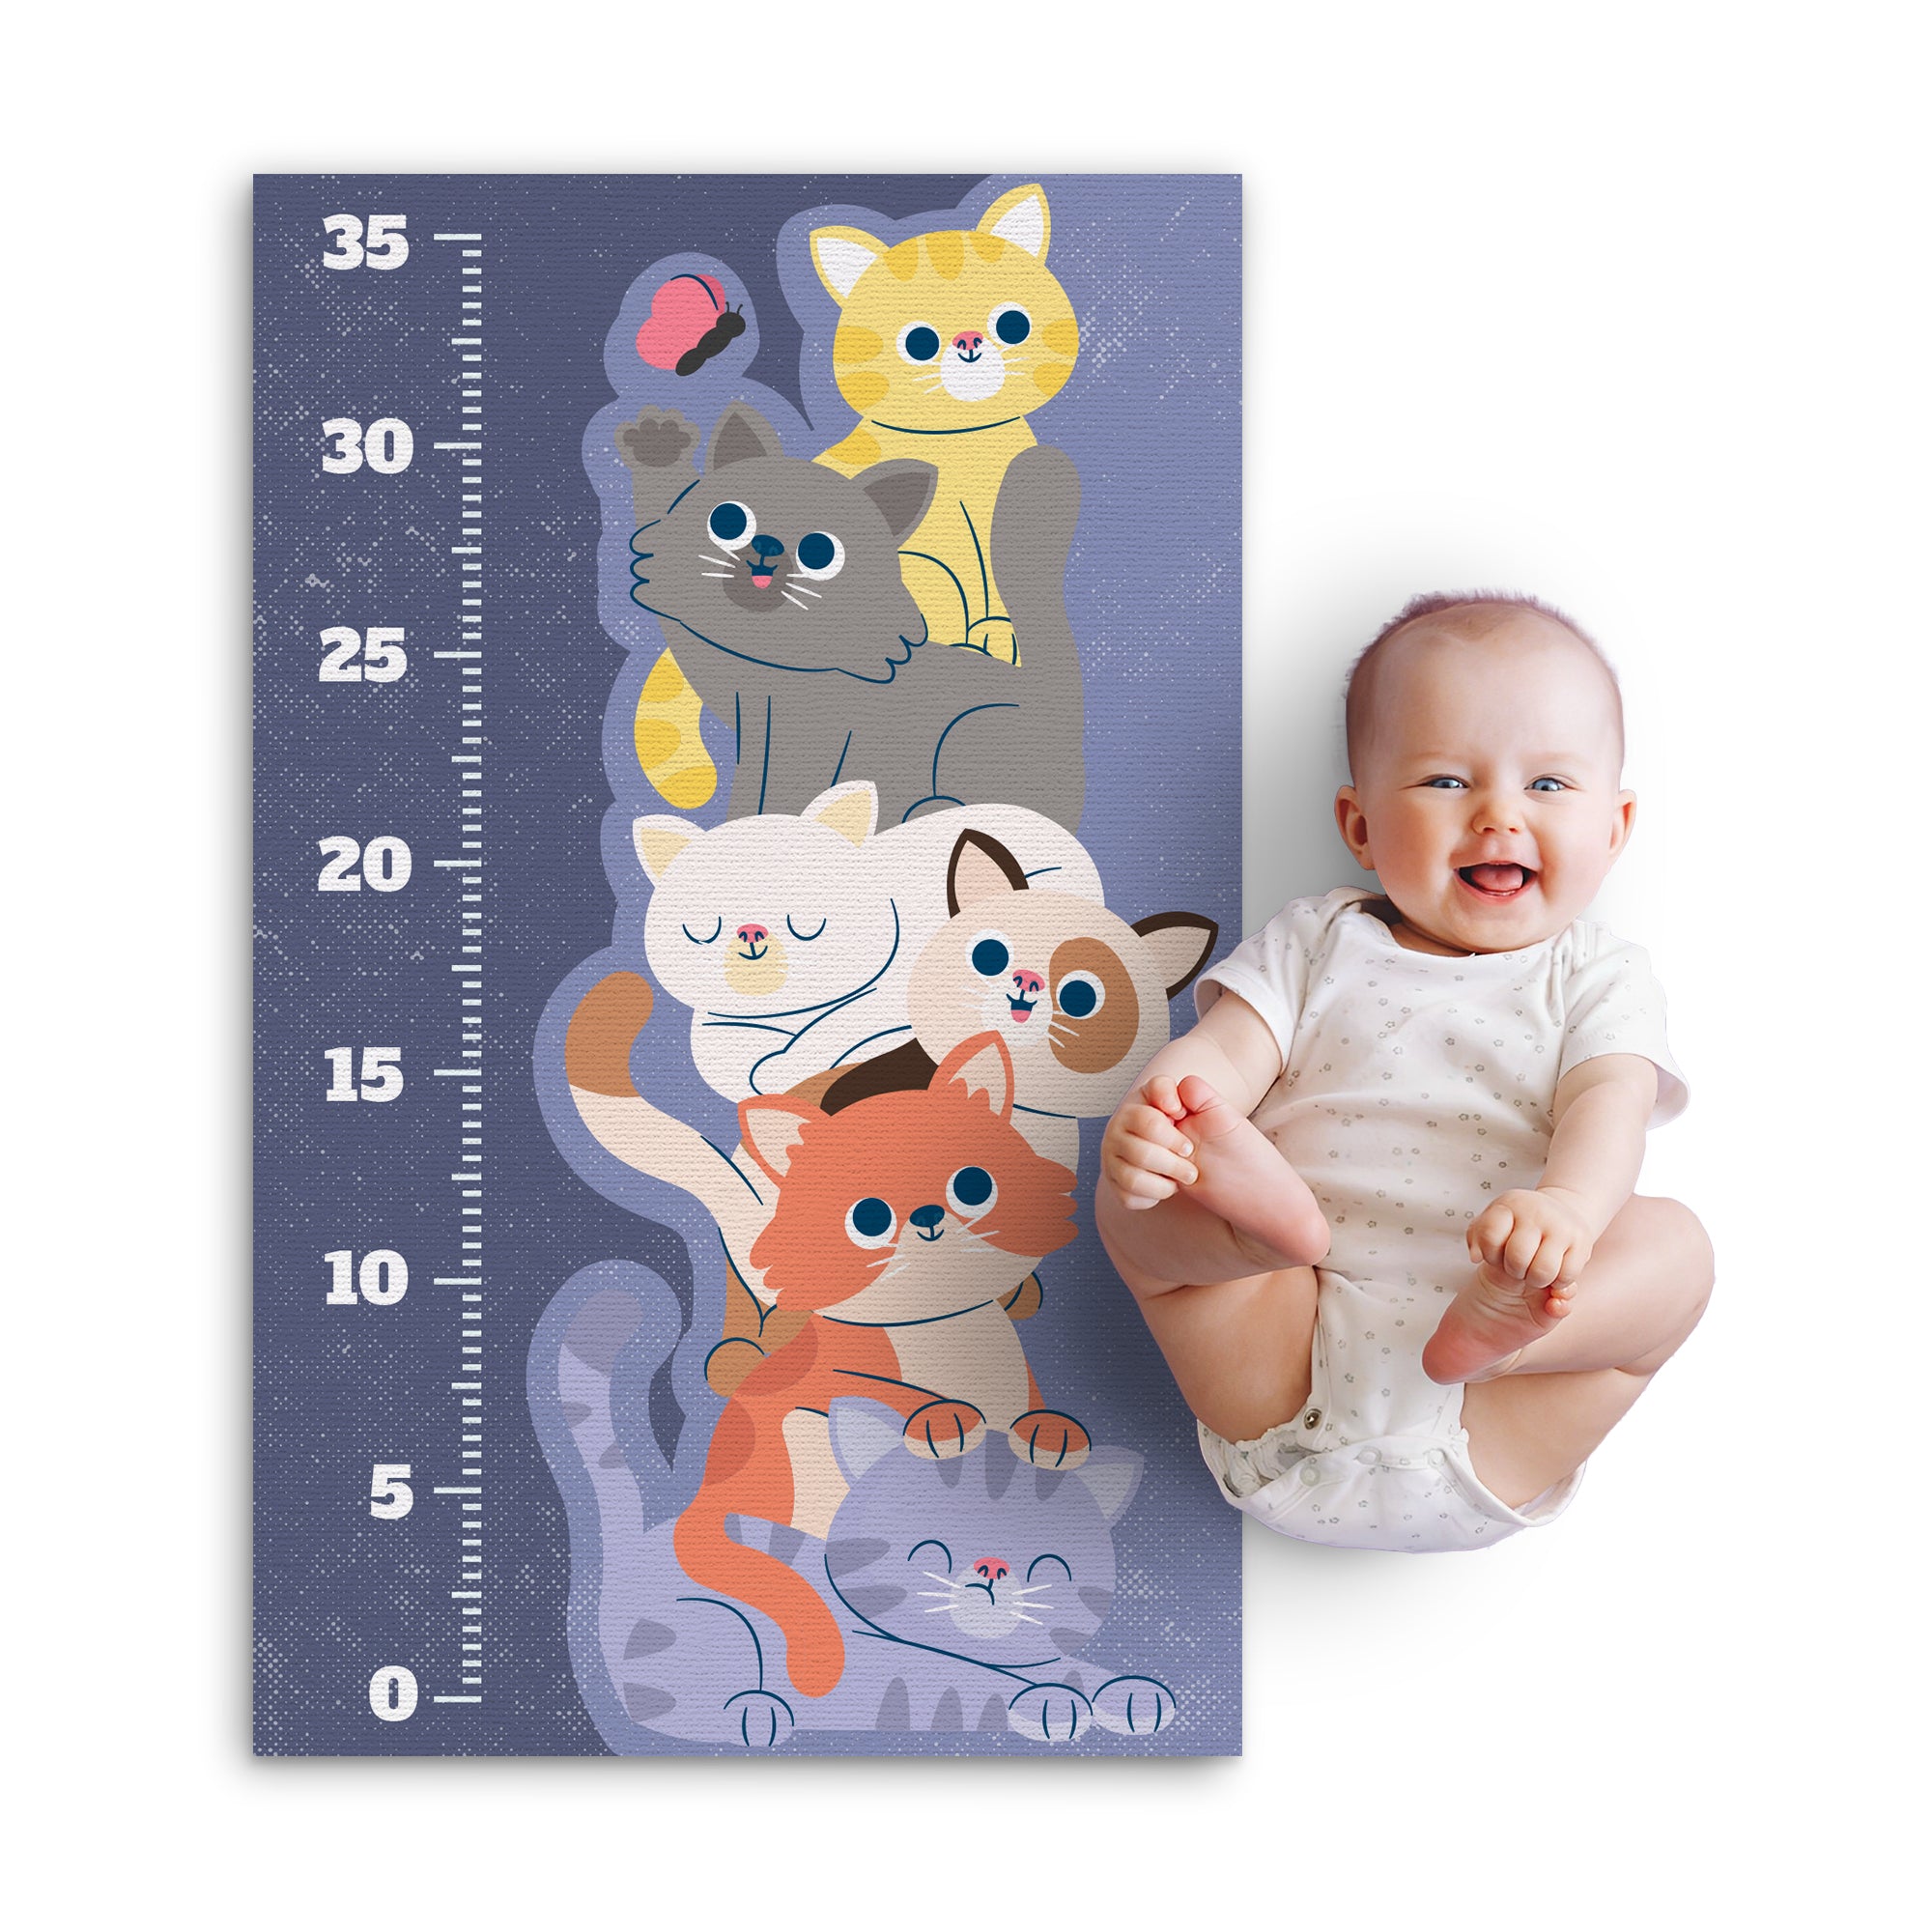 Kitty Infant Growth Chart